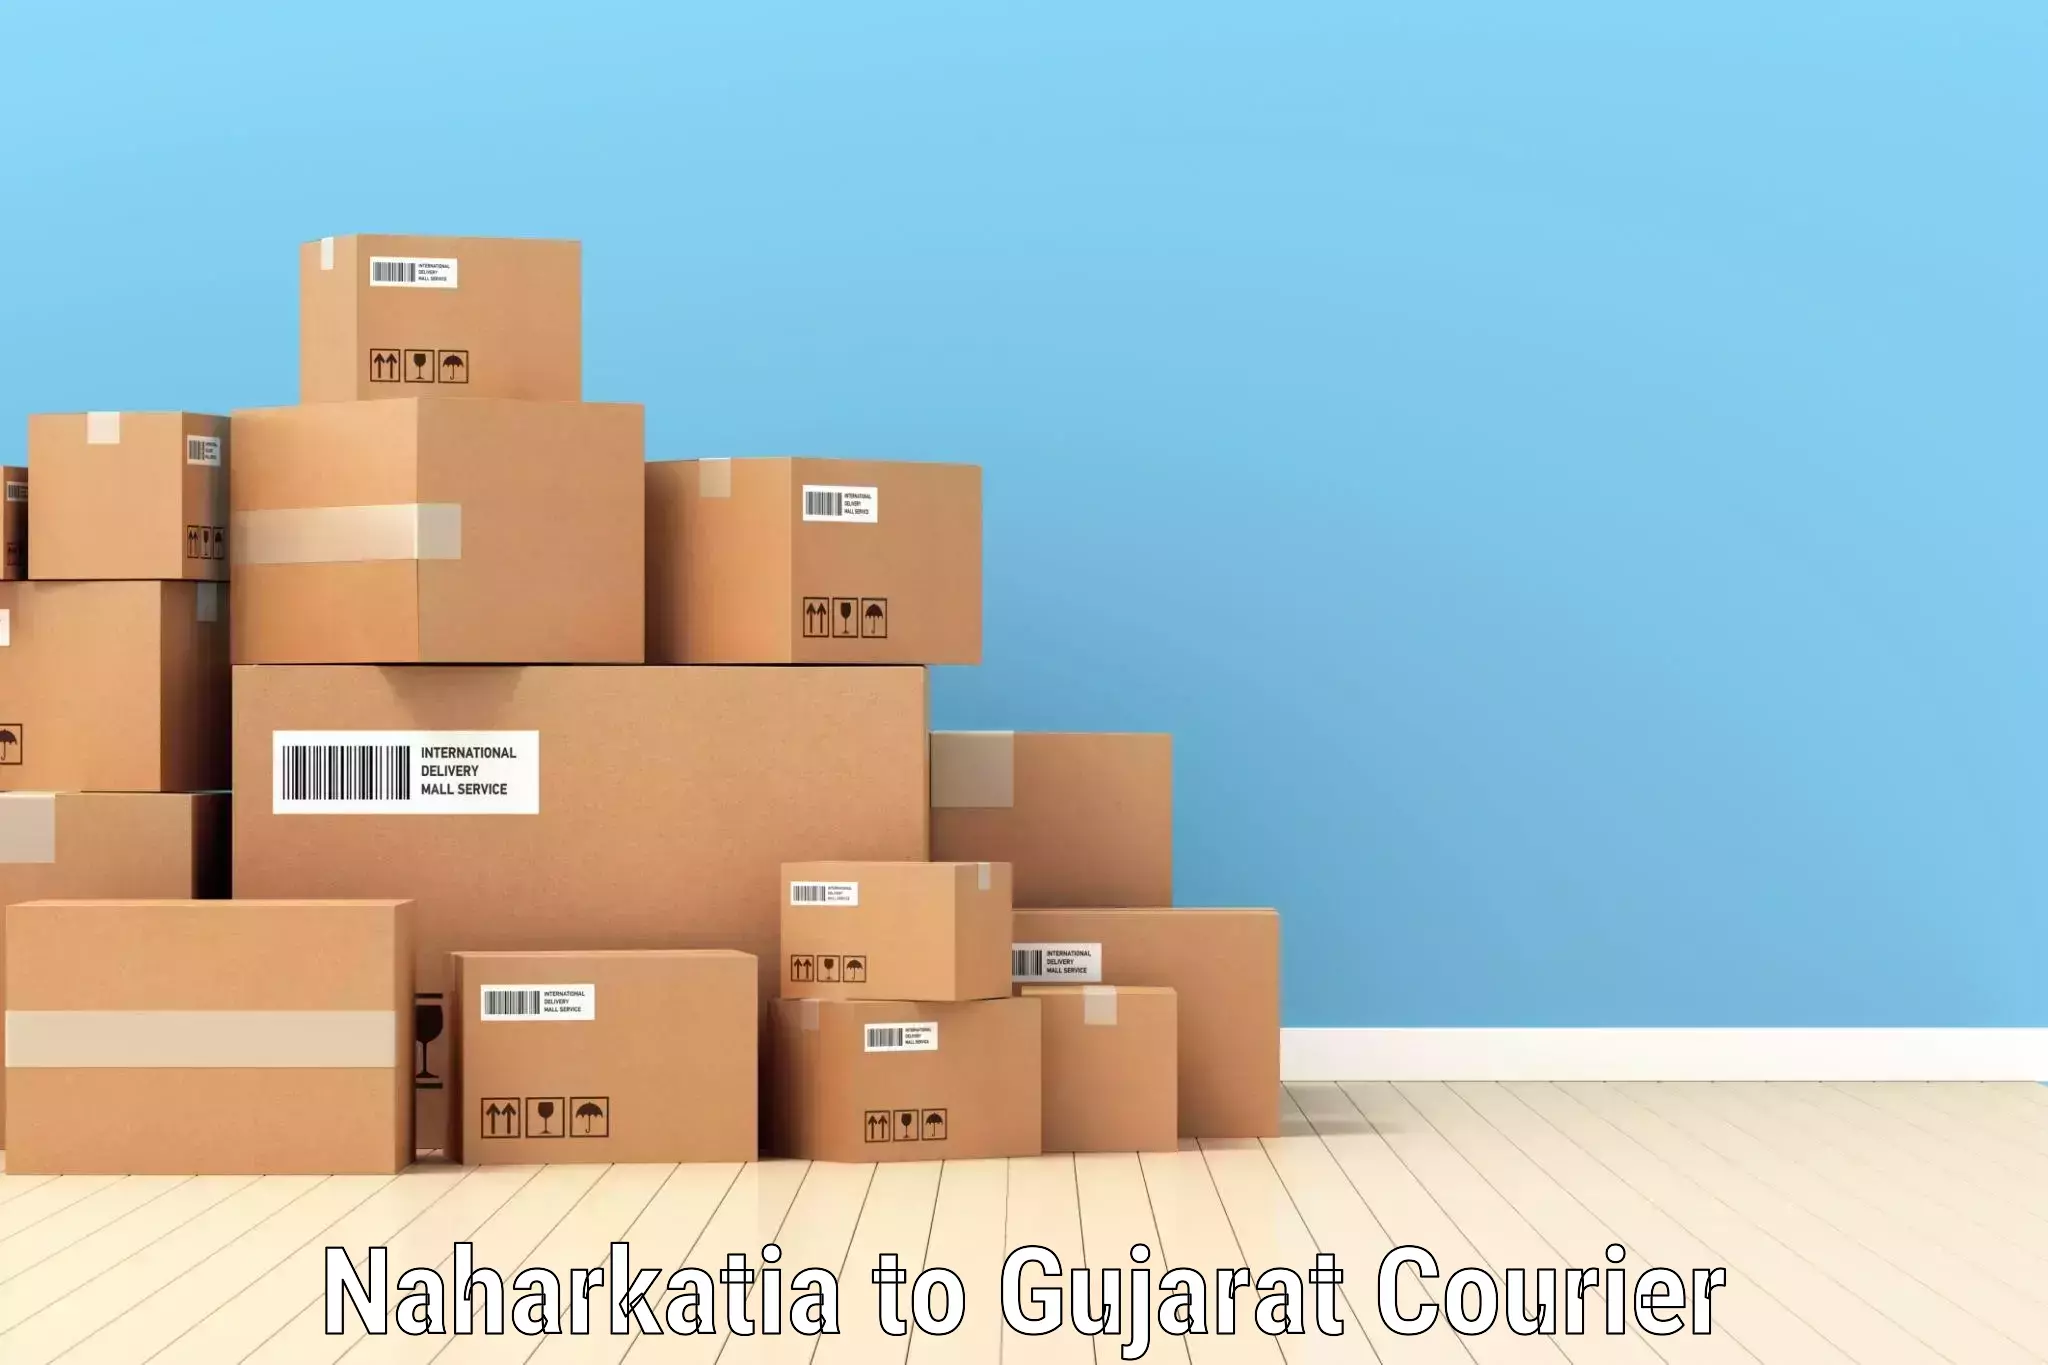 Cash on delivery service Naharkatia to Gujarat